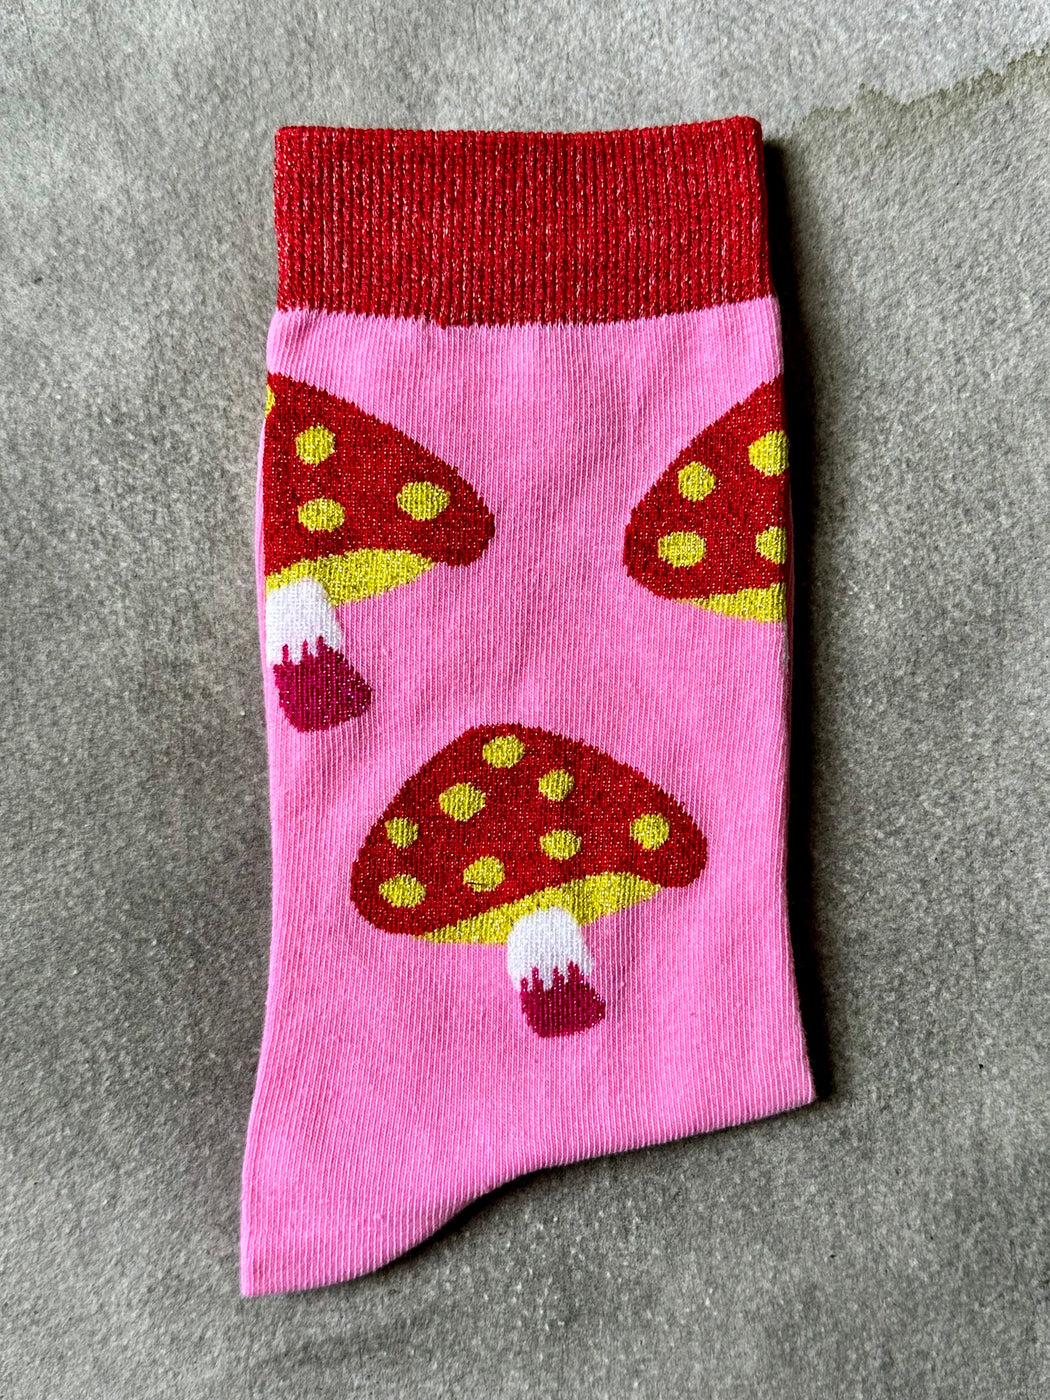 "Mushrooms" Socks by Centinelle